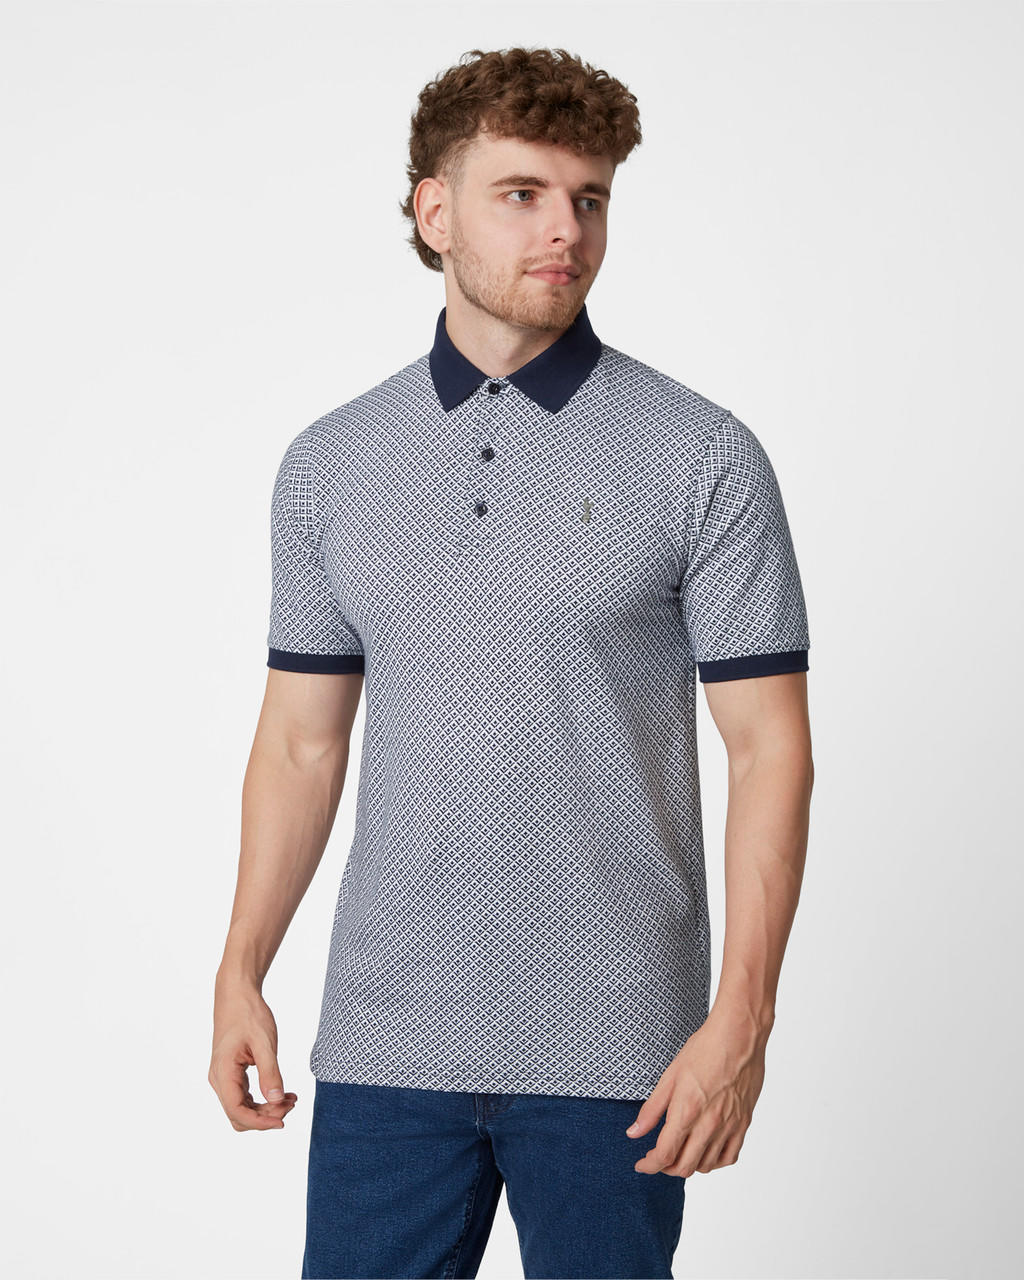 Spurs Mens All Over Jacquard Polo | Official Spurs Store